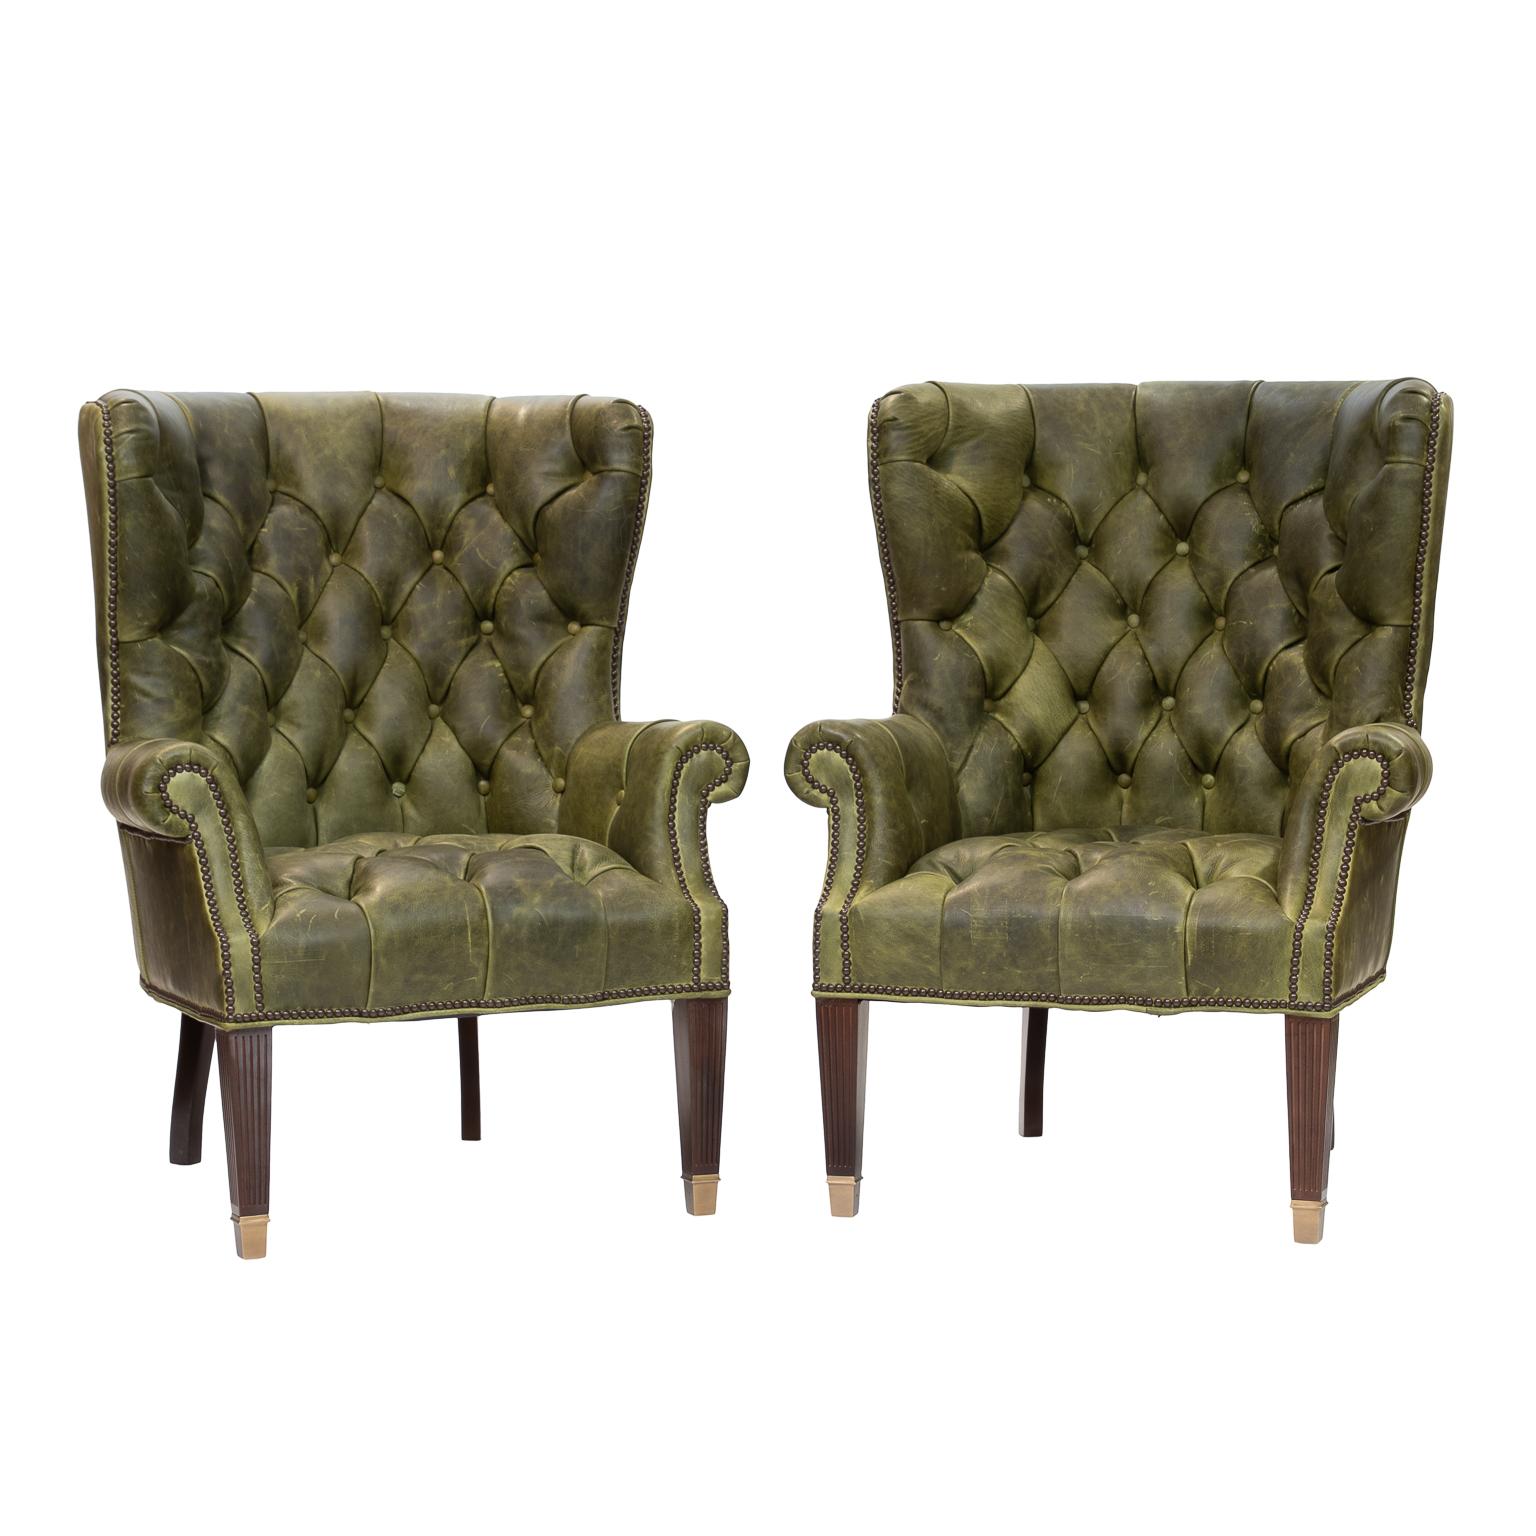 Pair of Tufted Green Leather Wing Chairs